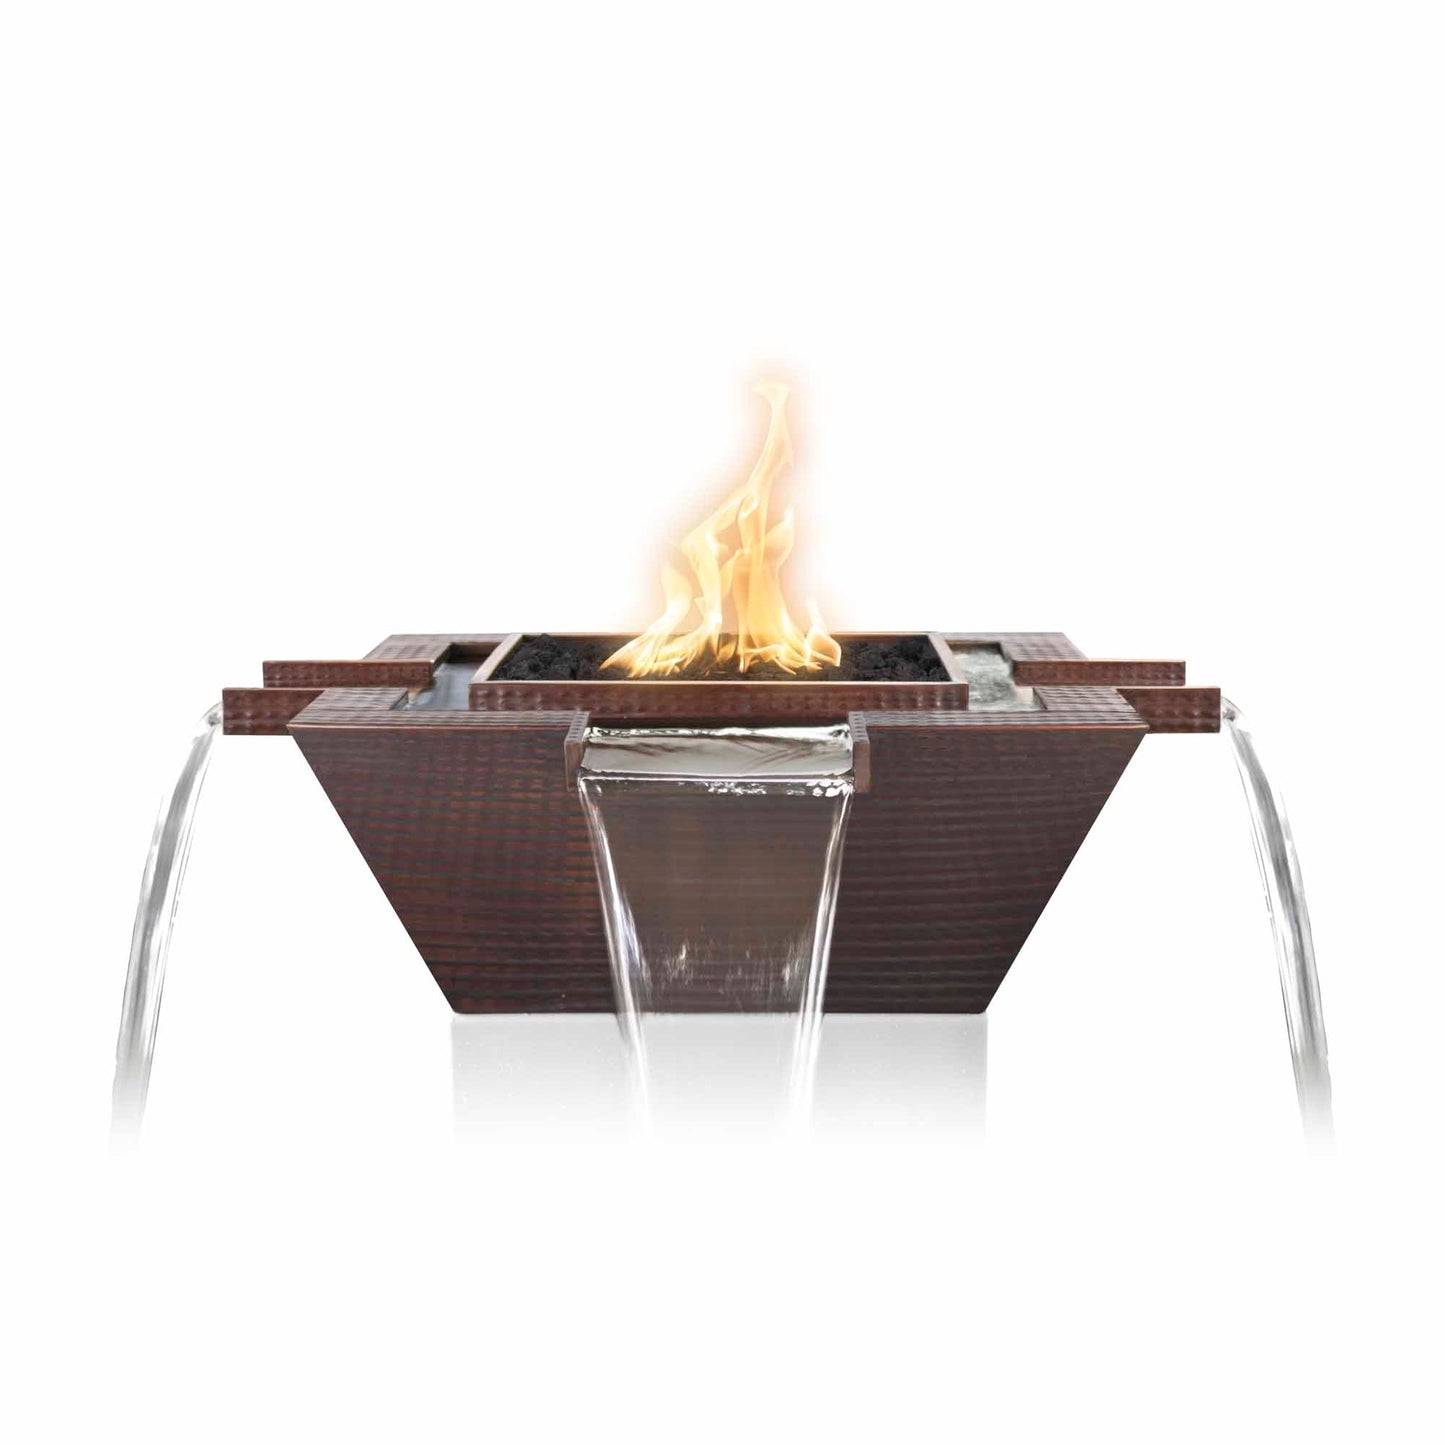 The Outdoor Plus Square Maya 36" Copper Vein Powder Coated Metal Liquid Propane Fire & Water Bowl 4-Way Spill with Match Lit Ignition